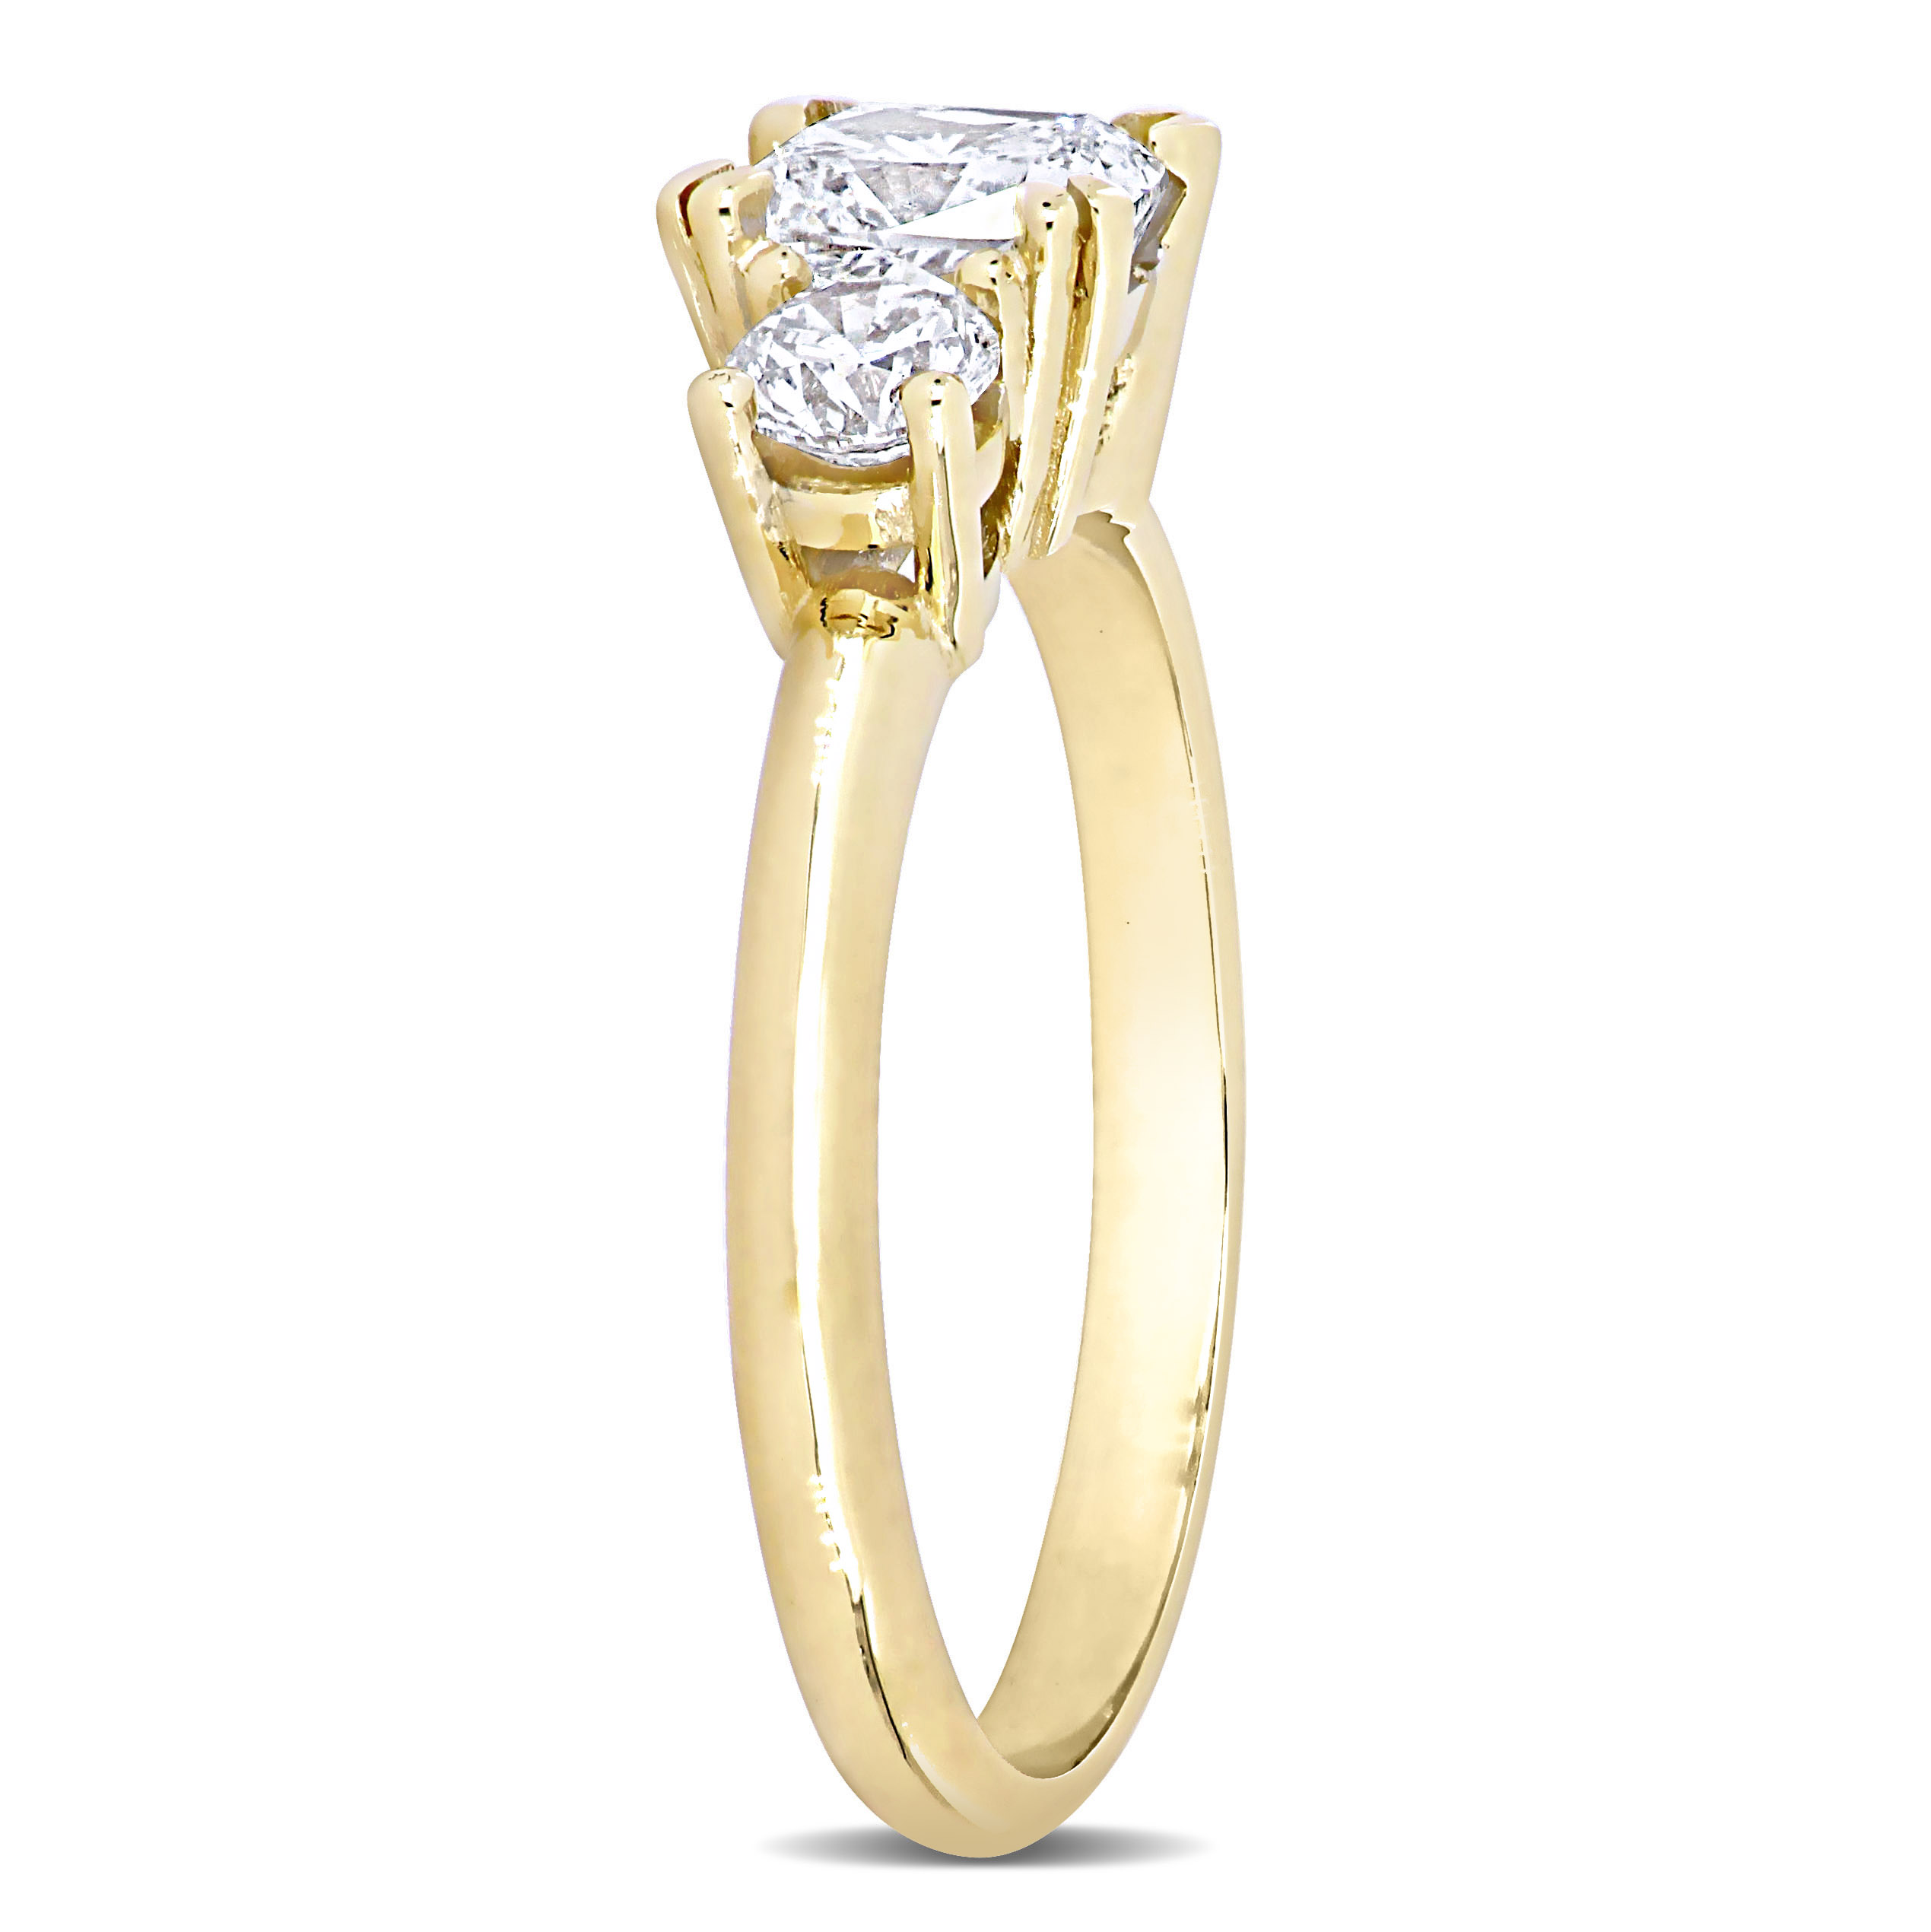 1 1/2 CT TW Diamond Engagement Ring in 14k Yellow Gold